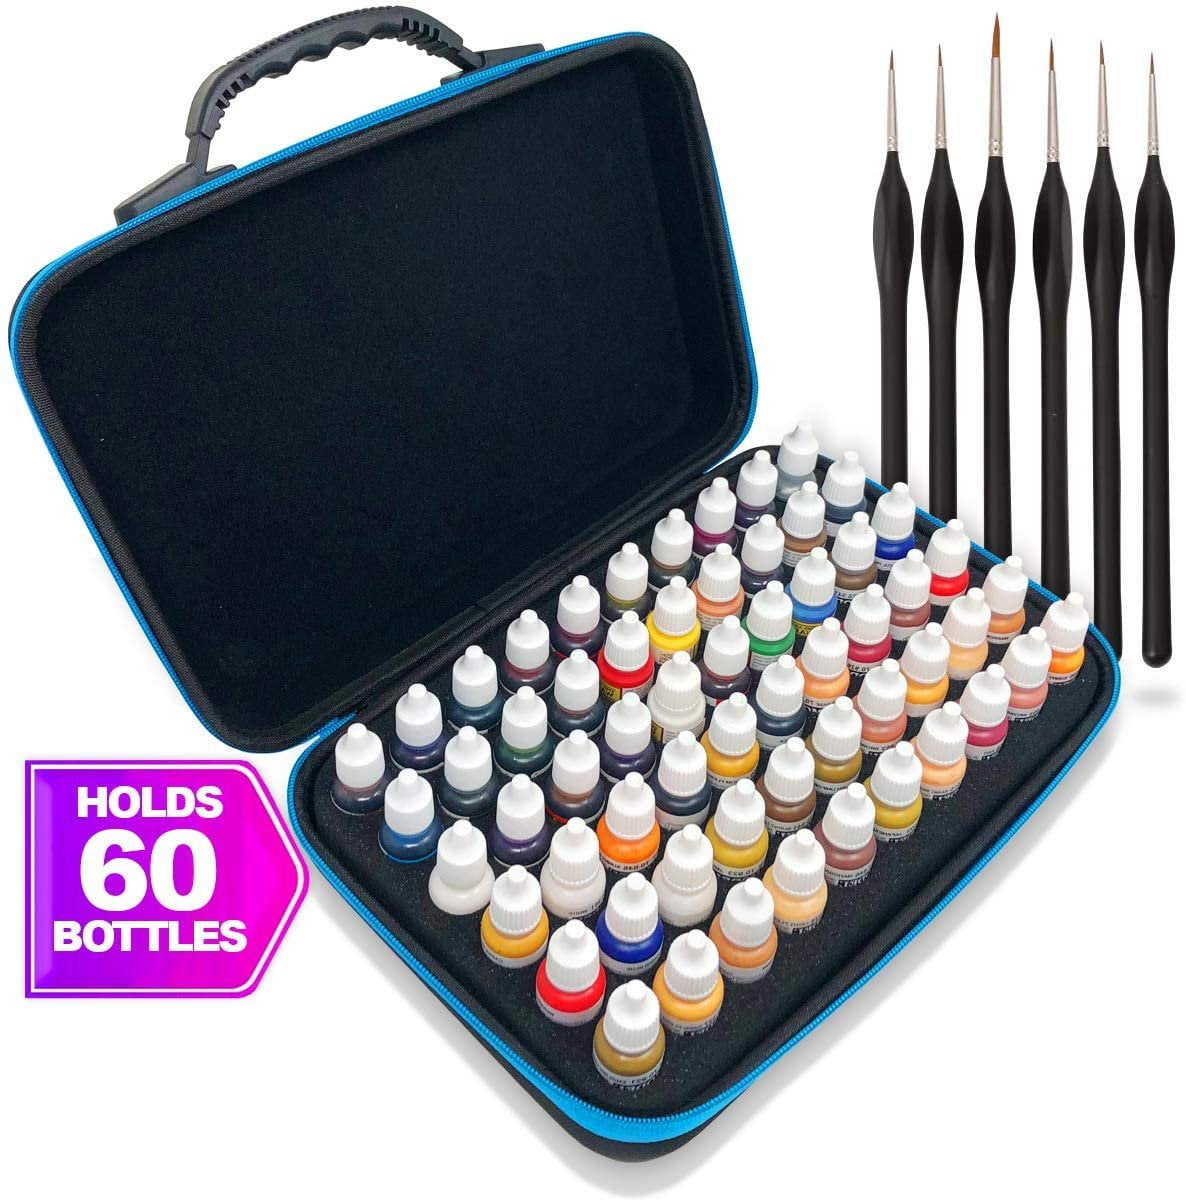 Pixiss Model Paint Storage Case - Acrylic Paint Organizer Holder Tray Works  with Round Top Hobby Paint Brands - Pixiss Model Accessory Kit for Gundam  Model Assemble Building - Miniature Paint 